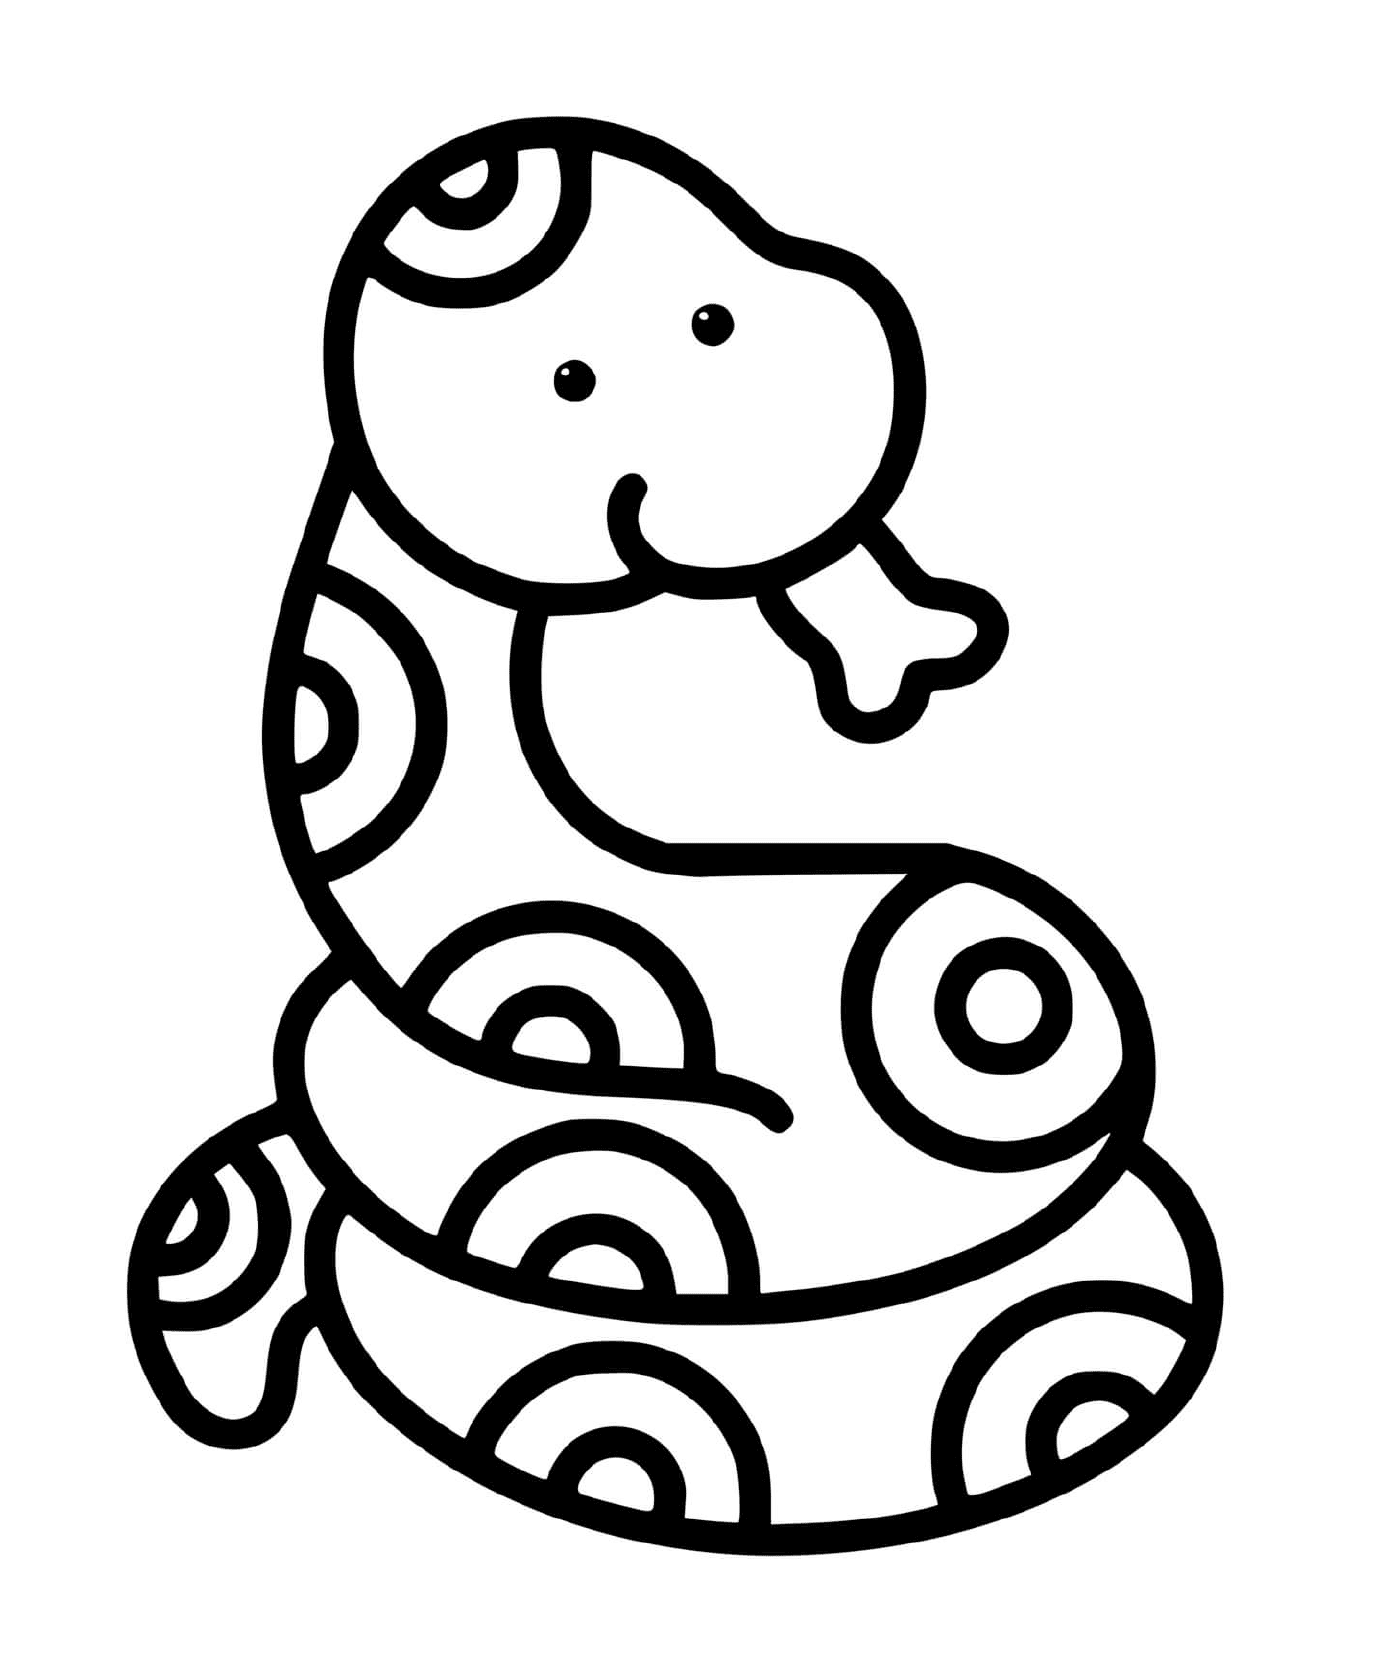  An easy to draw snake for 2-year-olds 